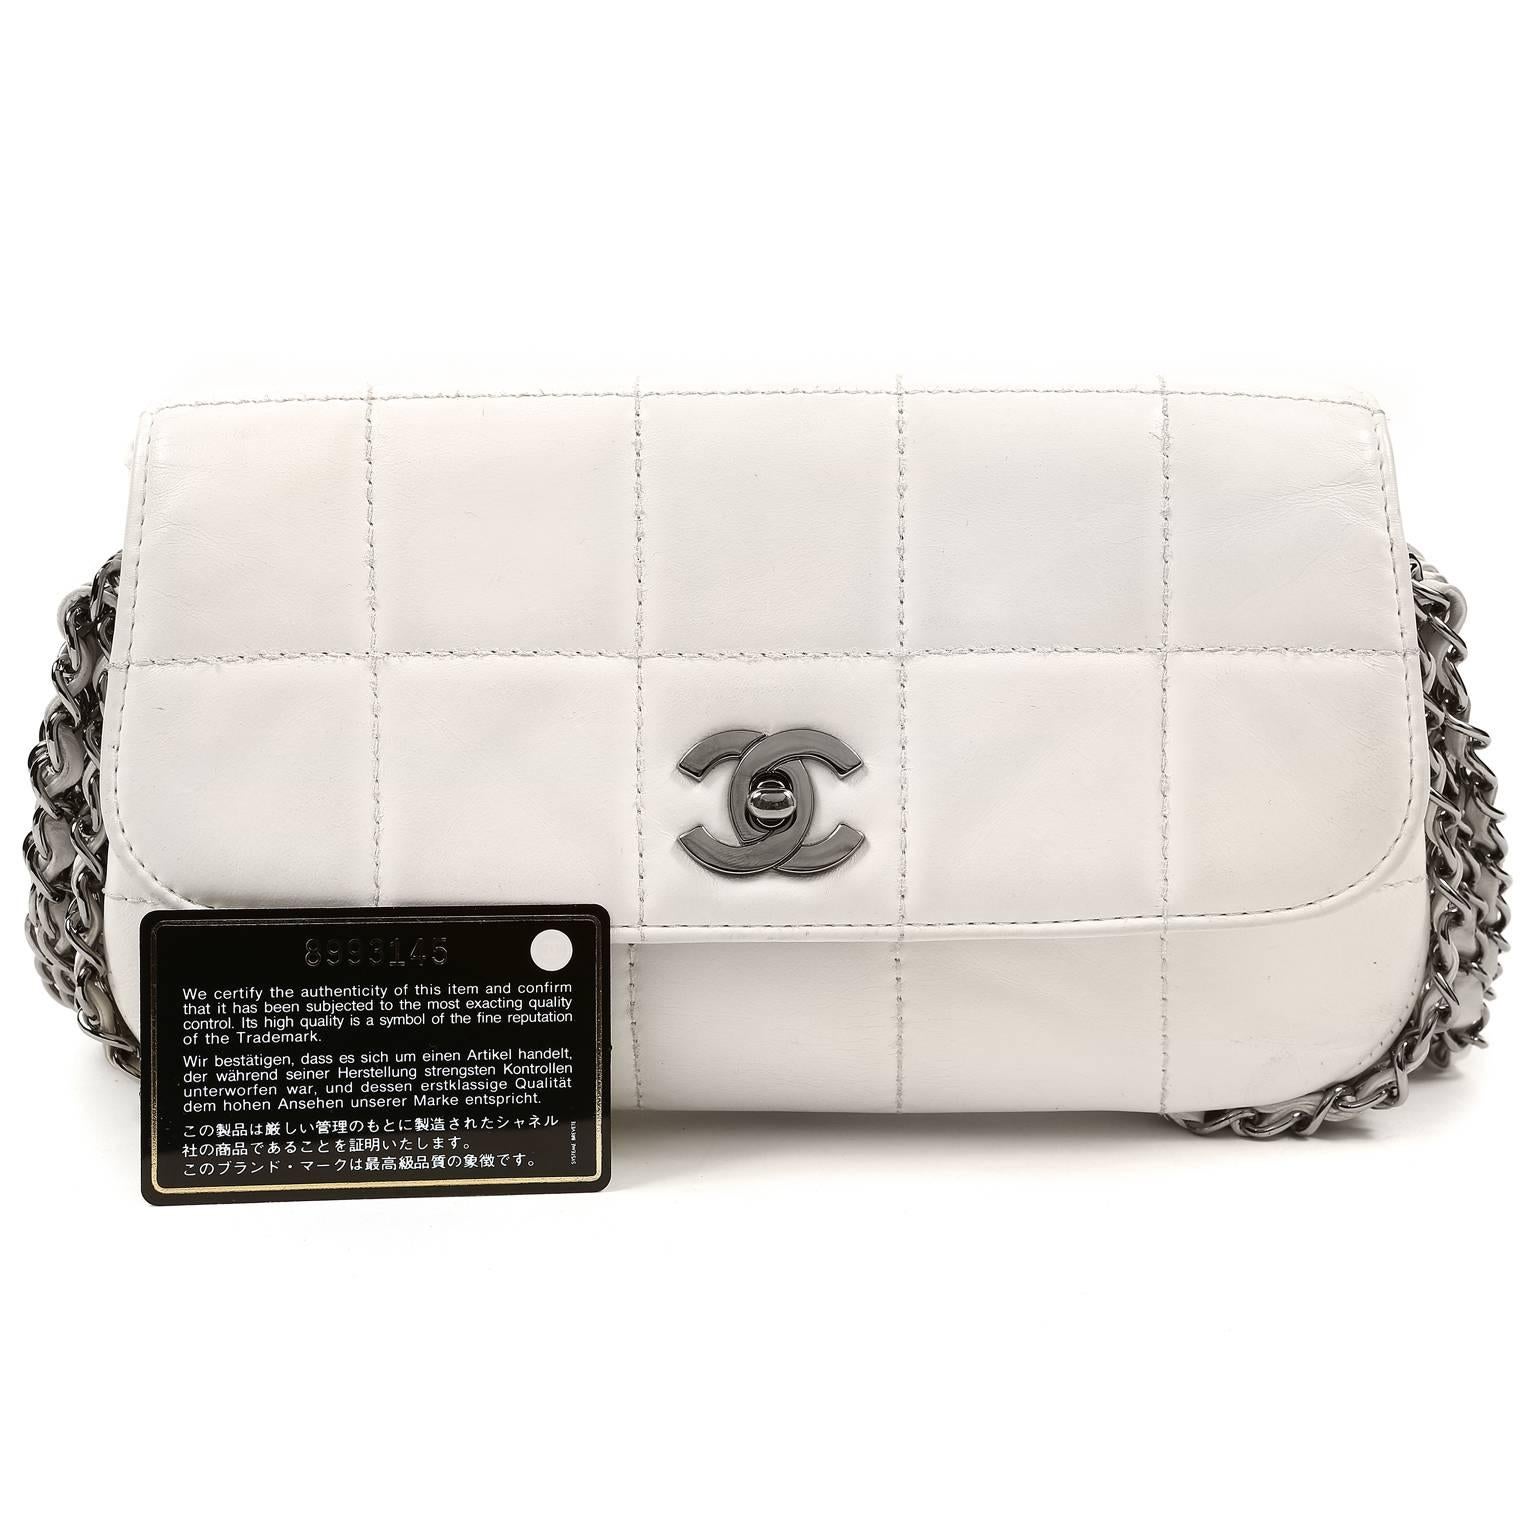 Chanel White Leather Multi Chain Flap Bag- Special Edition 4